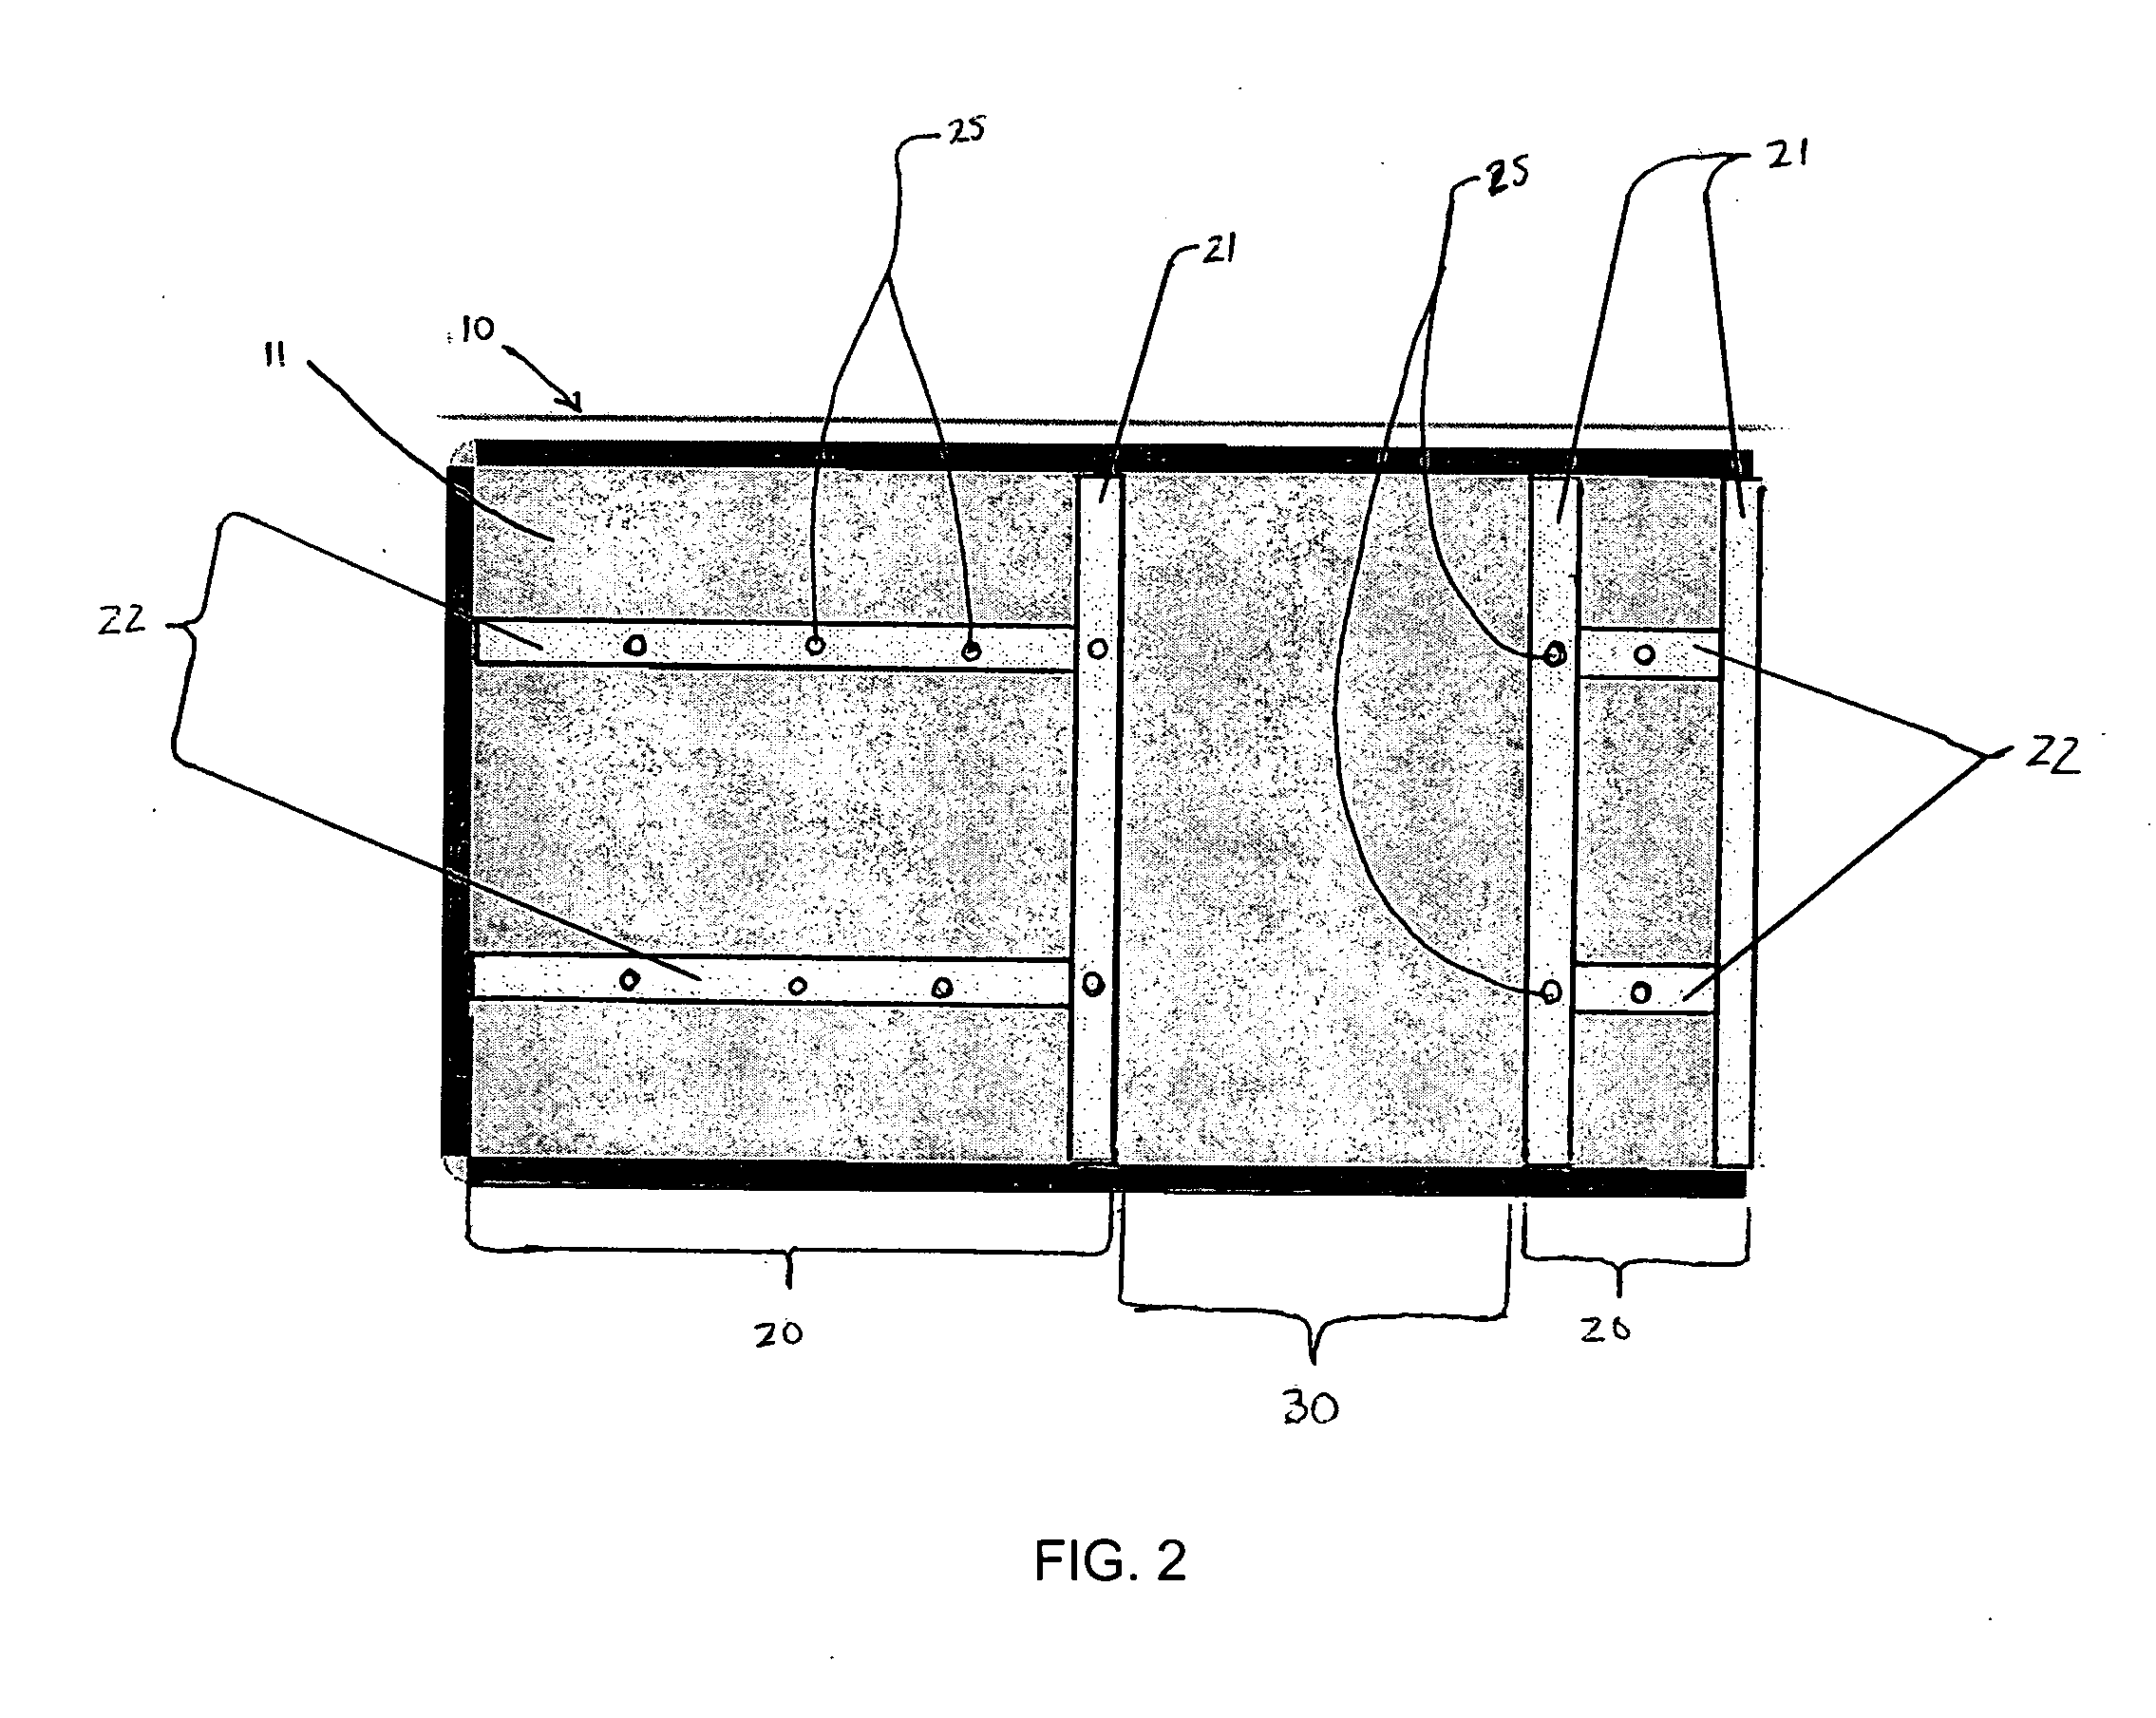 Composite cargo floor structure having a reduced weight